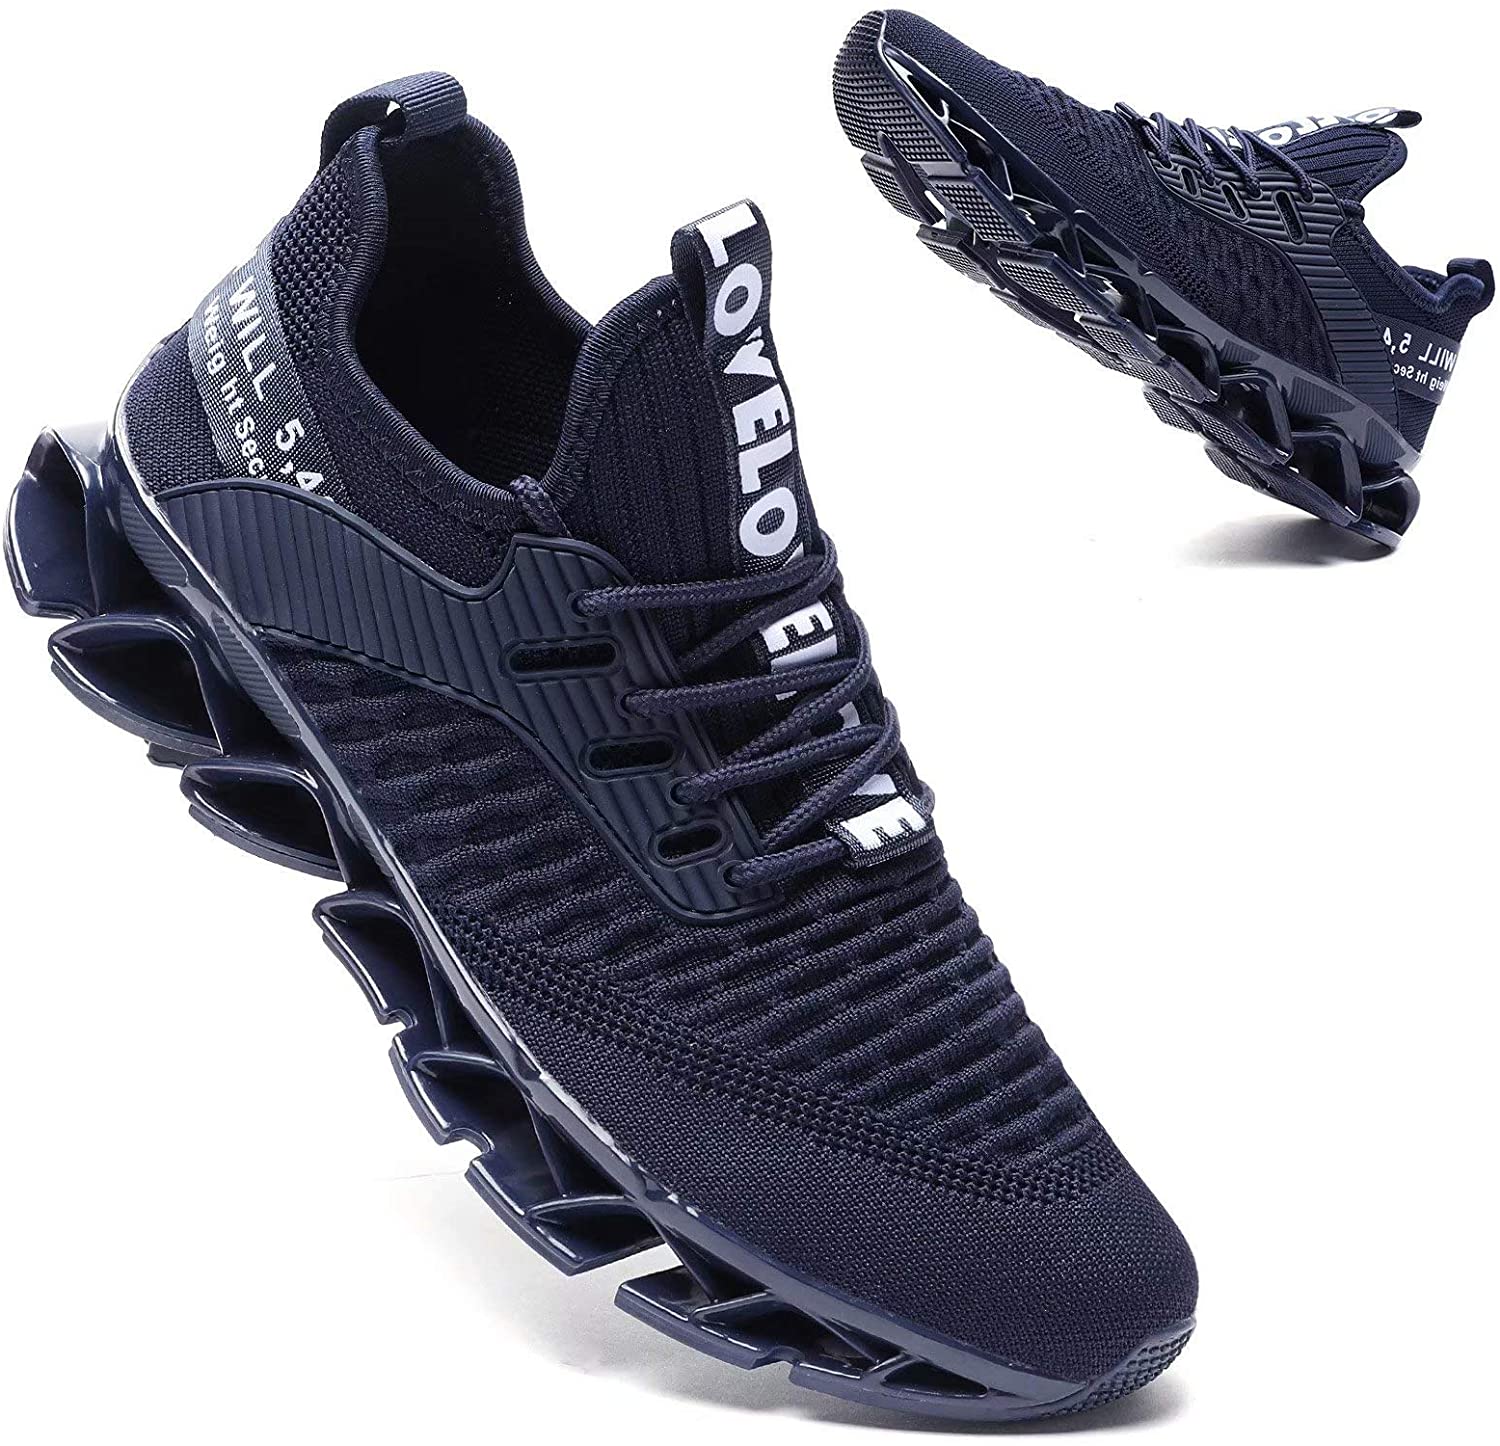 Dropship Men Outdoor Tennis Sneakers Lightweight Walking Trainers Blade  Sole Fashion Casual Breathable Mesh Non-slip Running Sports Shoes to Sell  Online at a Lower Price